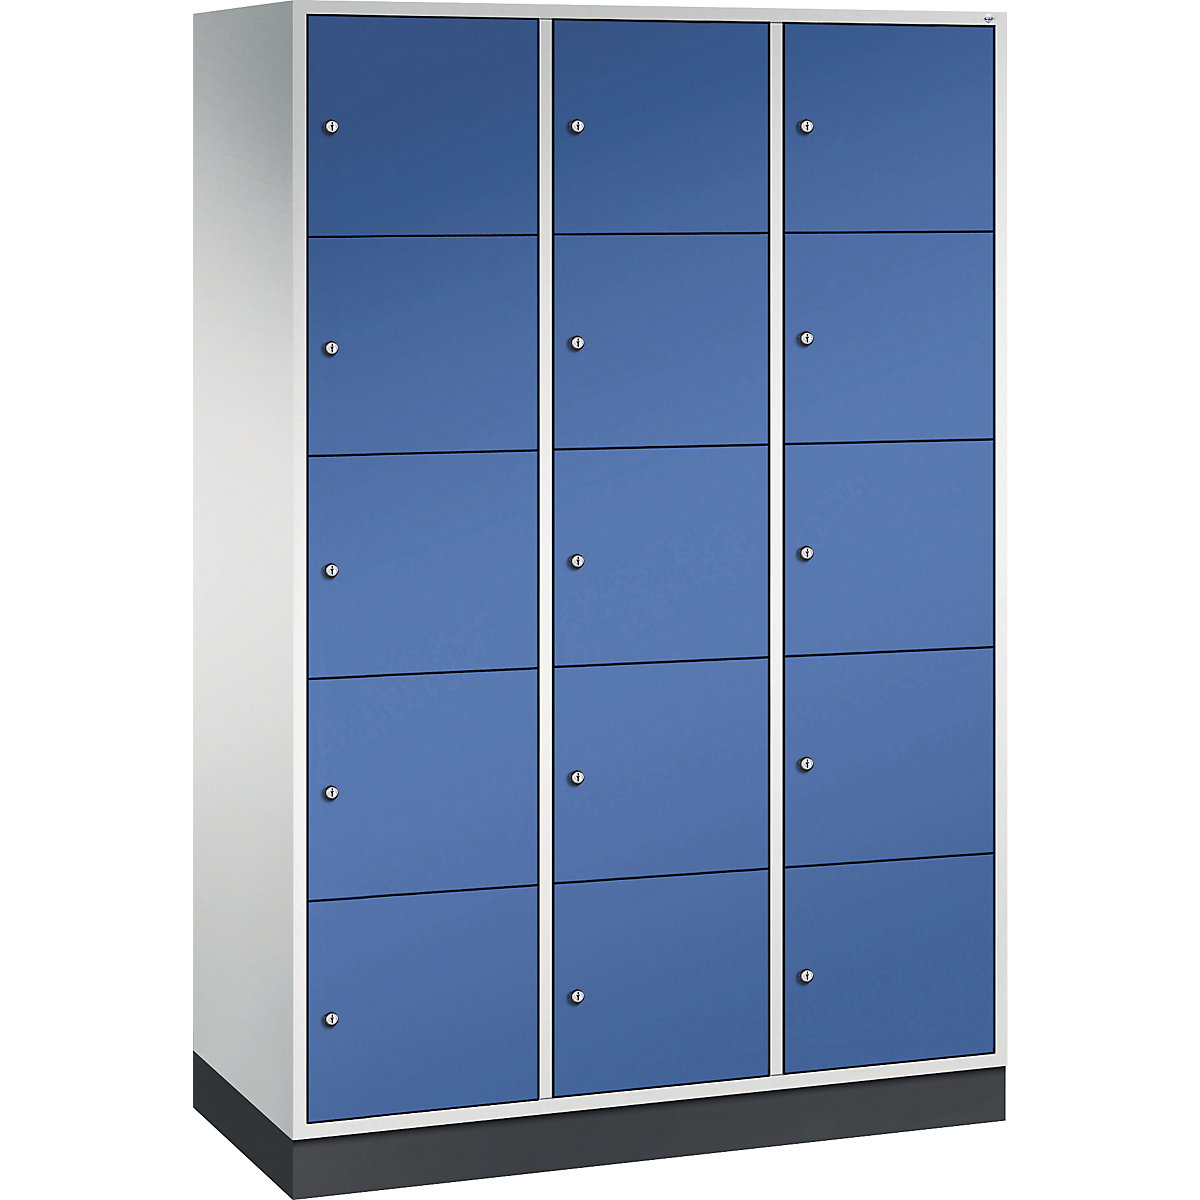 INTRO steel compartment locker, compartment height 345 mm – C+P, WxD 1220 x 500 mm, 15 compartments, light grey body, gentian blue doors